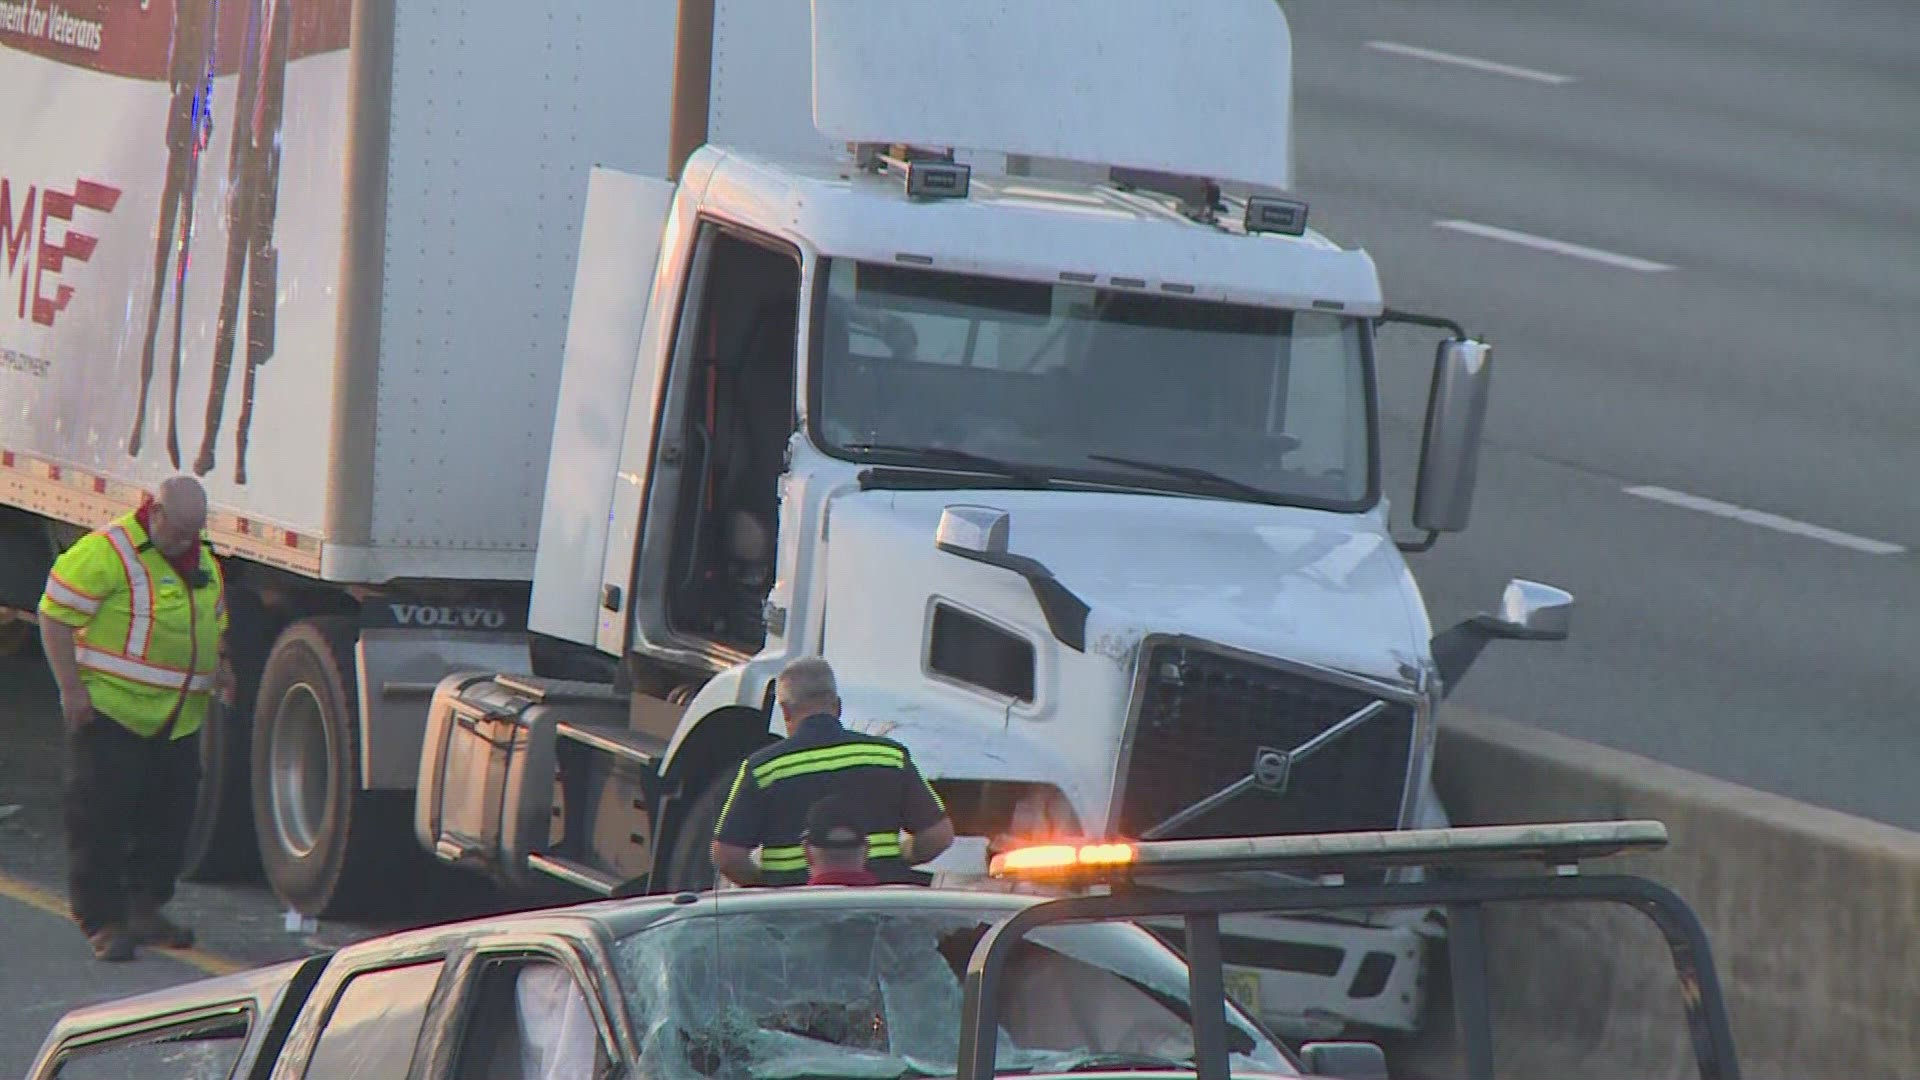 All lanes have reopened on I-40 W after truck fire in Winston-Salem.